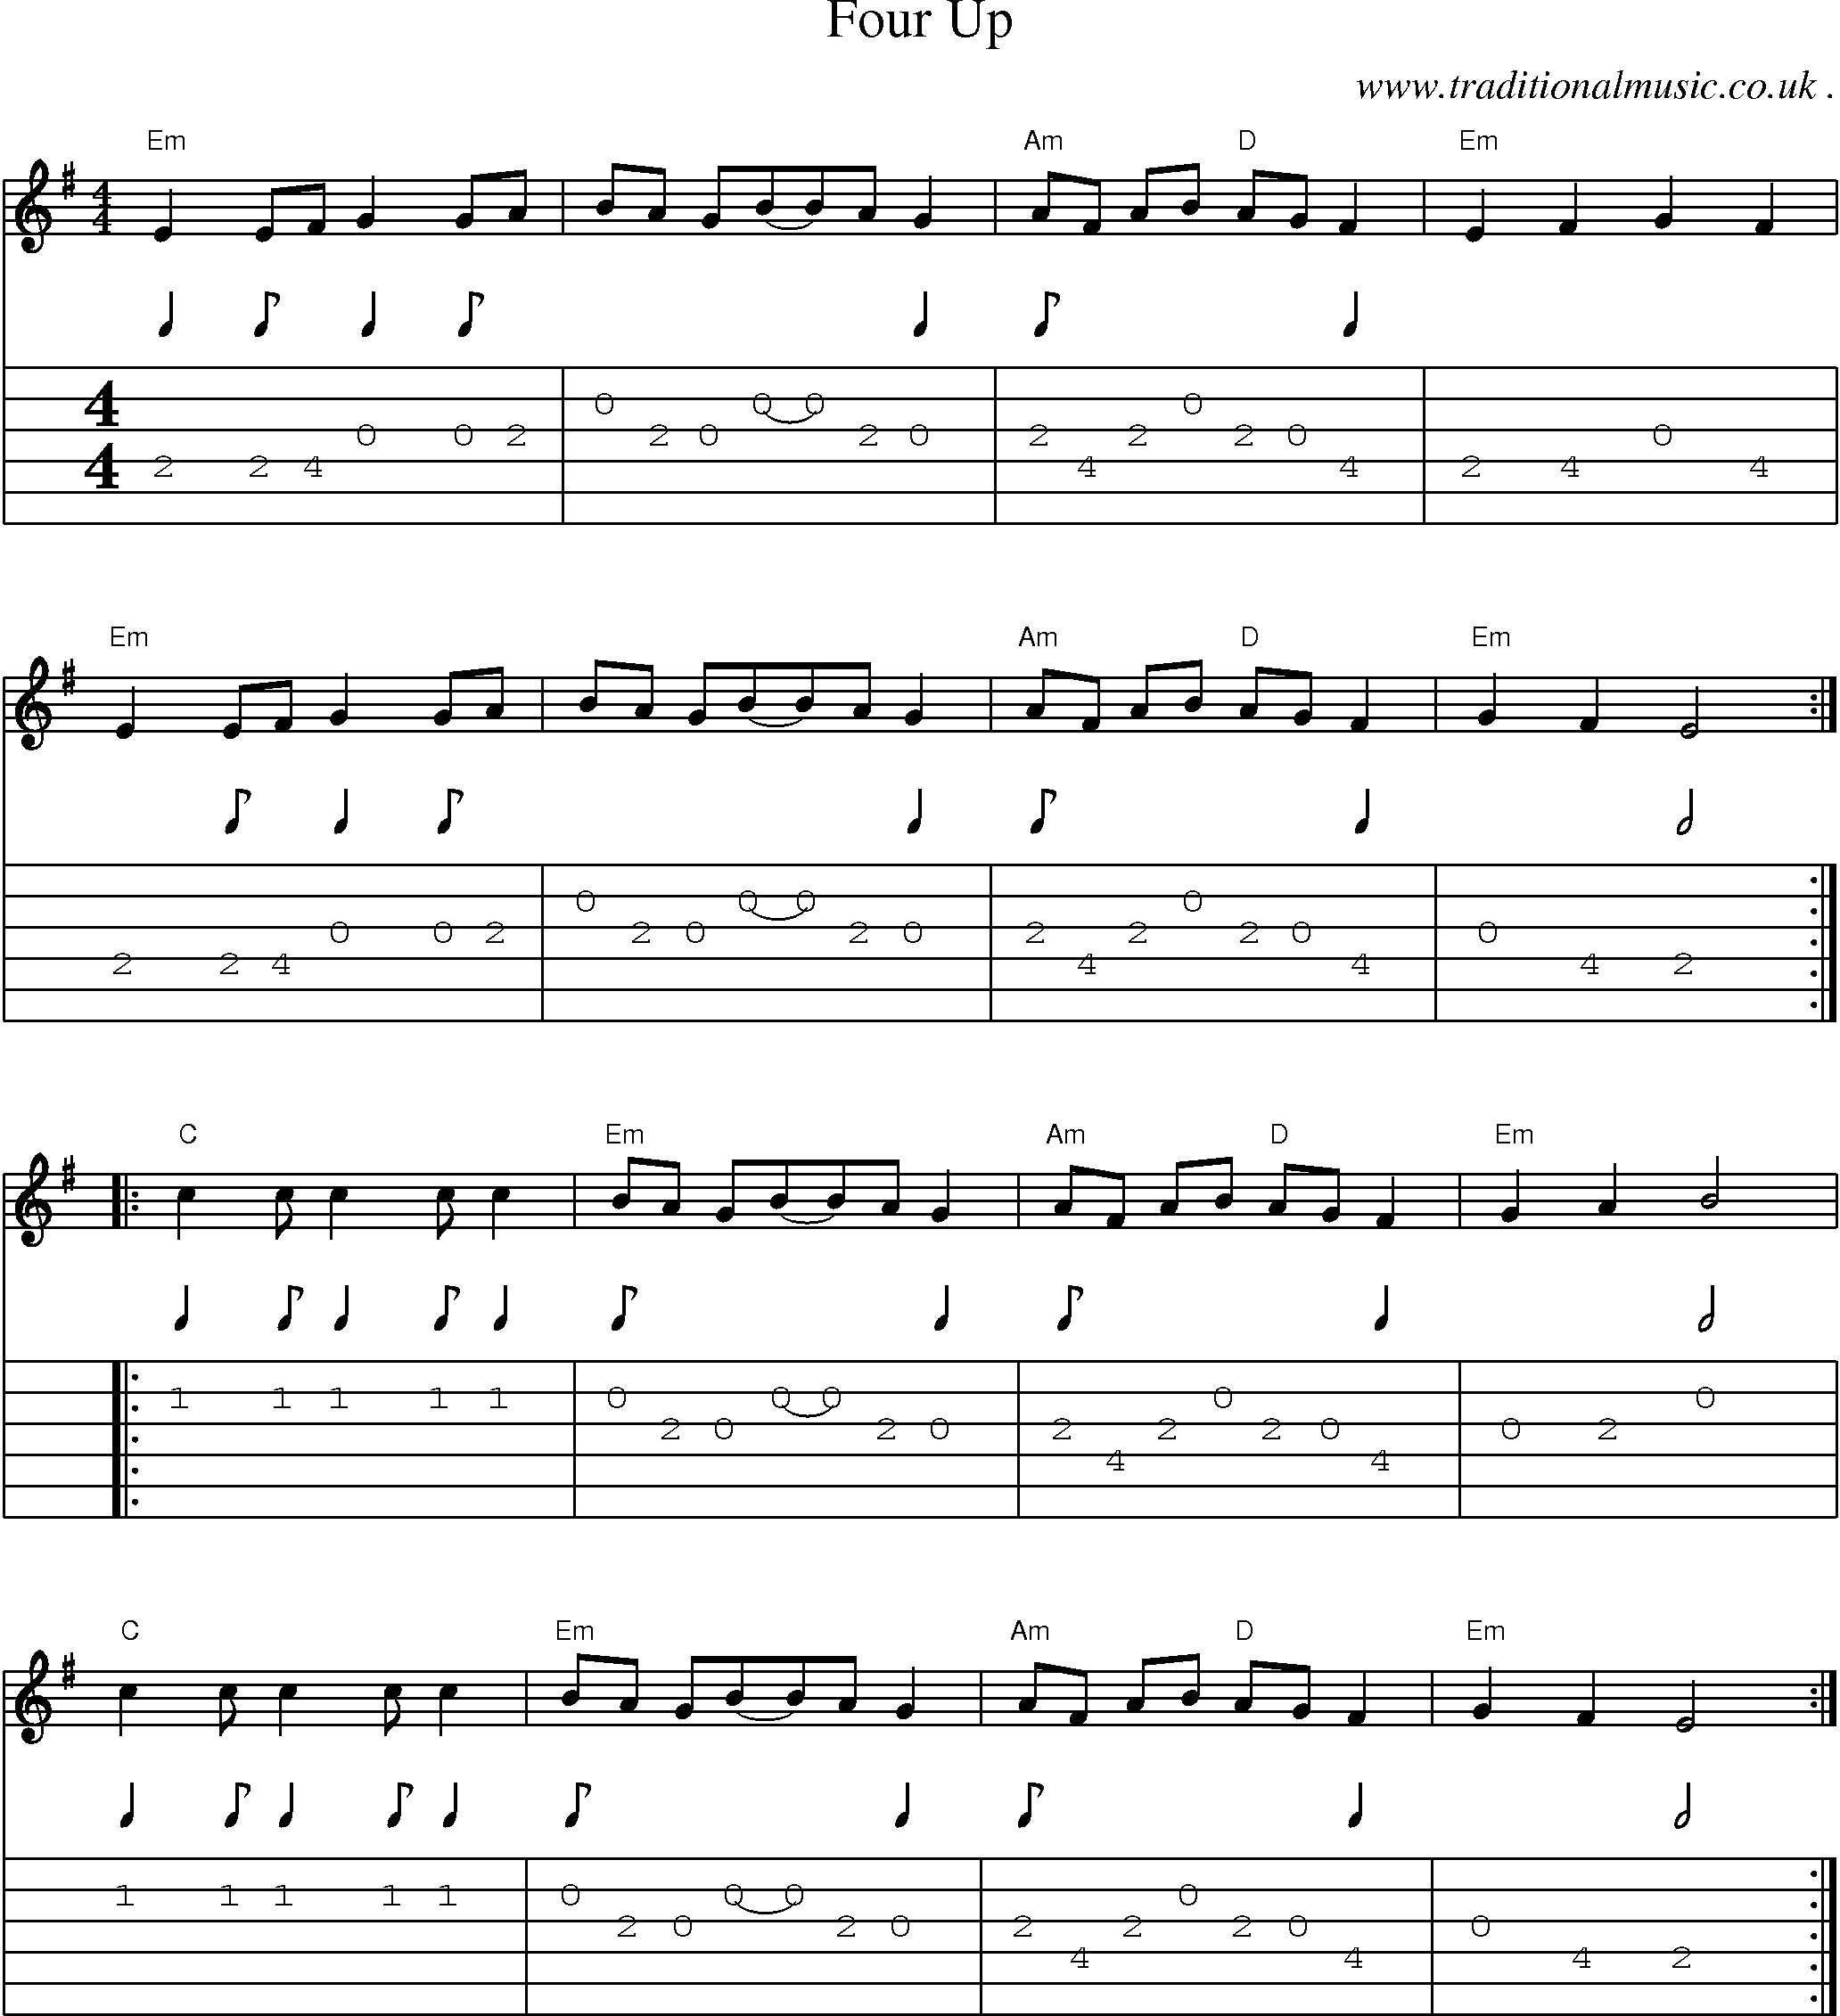 Music Score and Guitar Tabs for Four Up